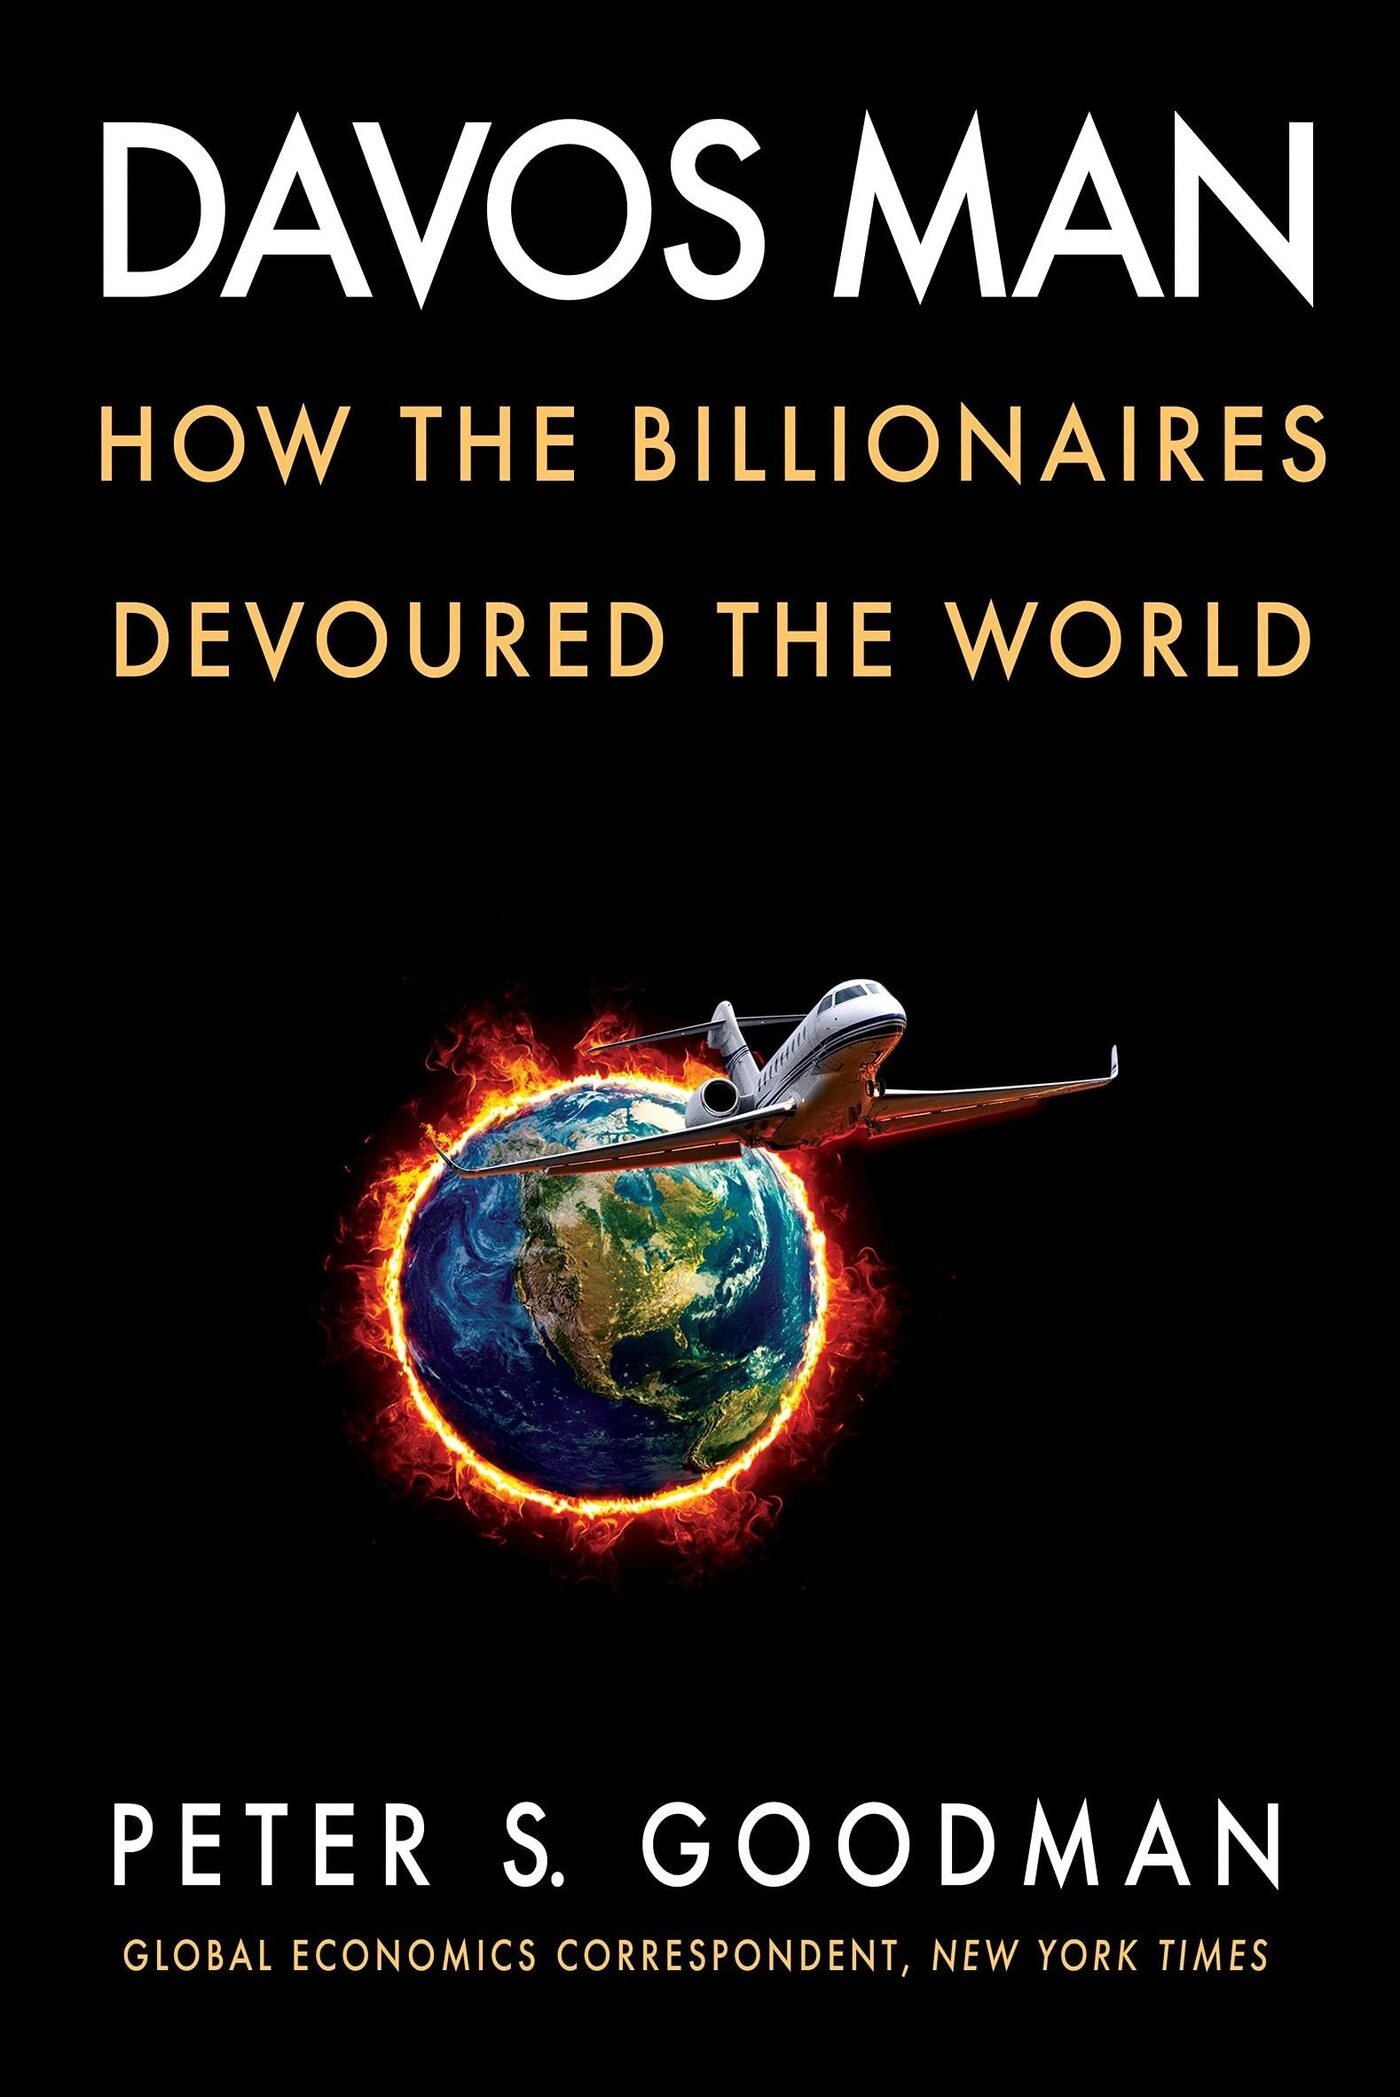 Davos Man: How the Billionaires Devoured the World, by Peter S. Goodman